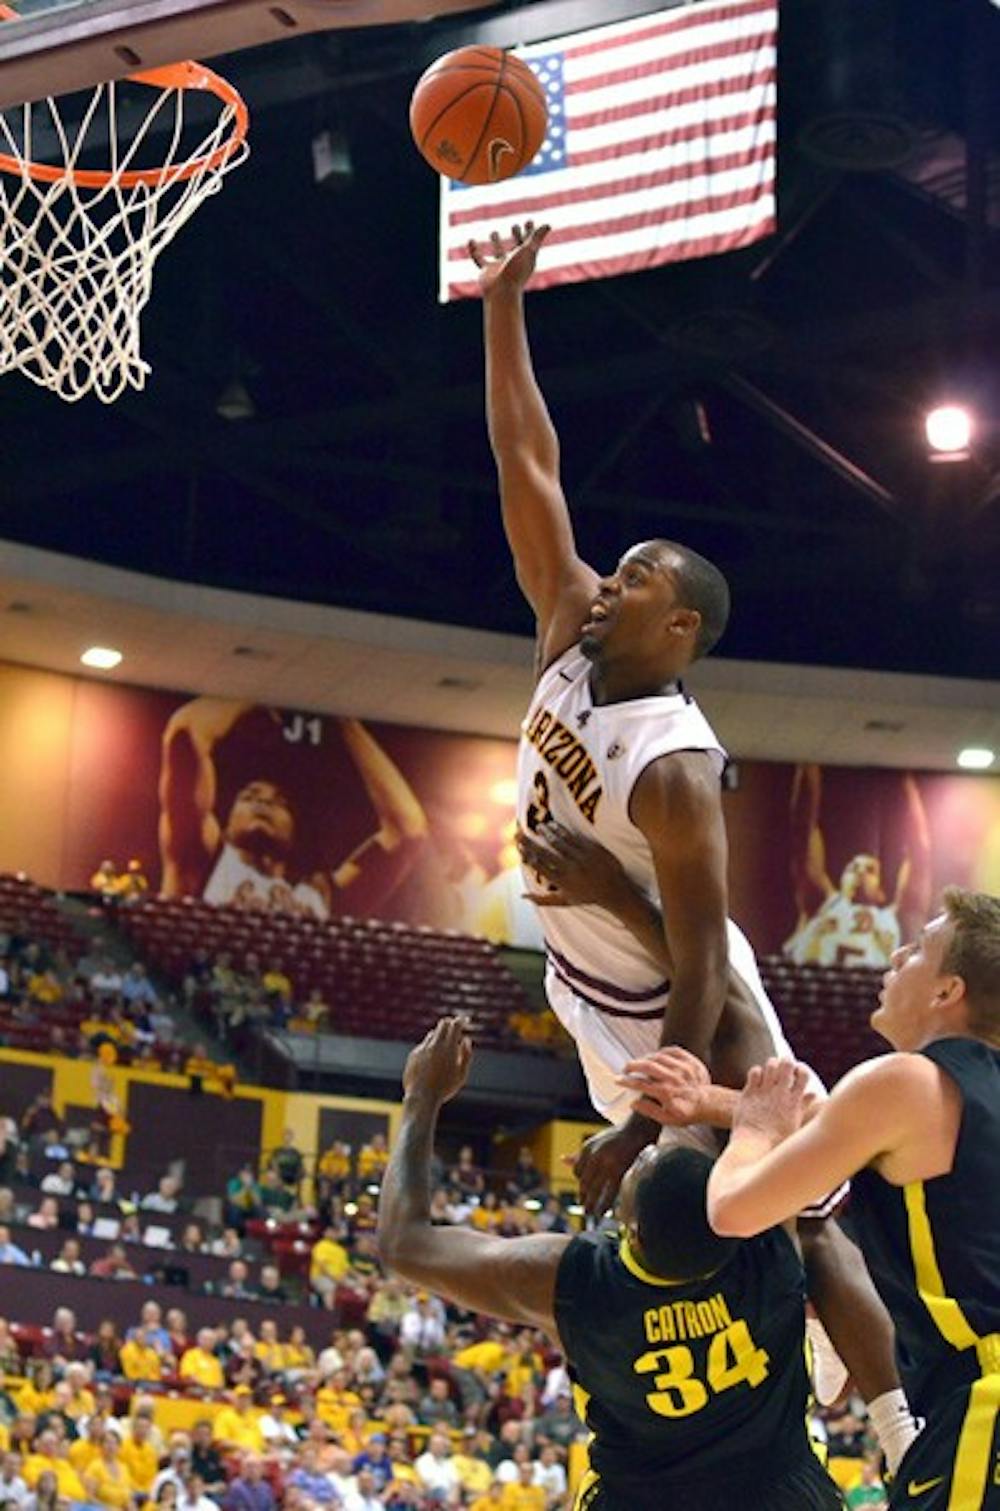 Lifted: ASU senior guard Ty Abbott sores over Oregon redshirt senior forward Joevan Catron during the Sun Devils’ 20-point victory over the Ducks in Tempe Thursday night. Abbott and fellow senior Rihards Kuksiks scored 22 points each in the game. (Photo by Aaron Lavinsky)